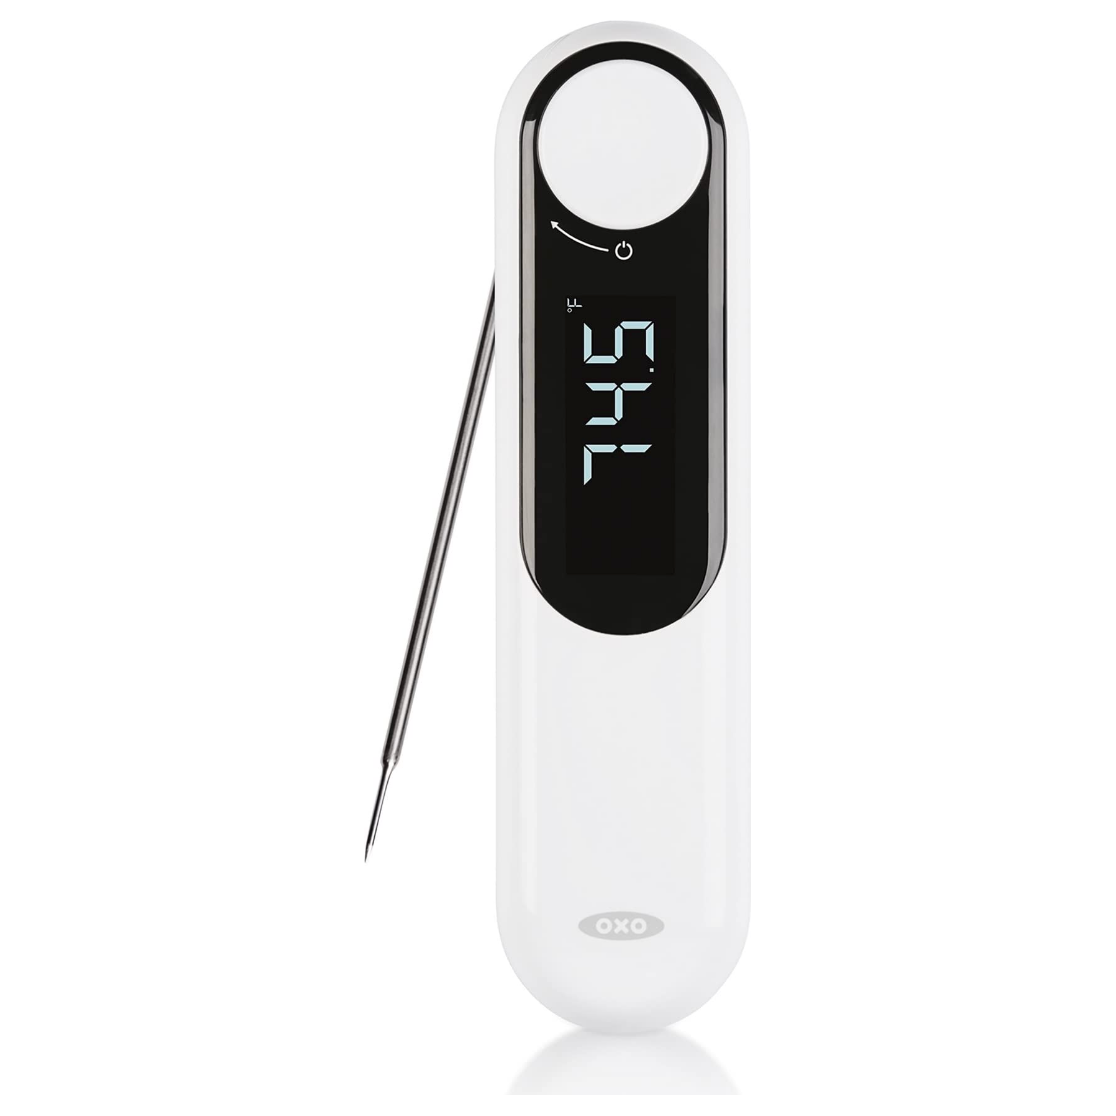 OXO GOOD GRIPS OXO THERMOCOUPLE THERMOMETER